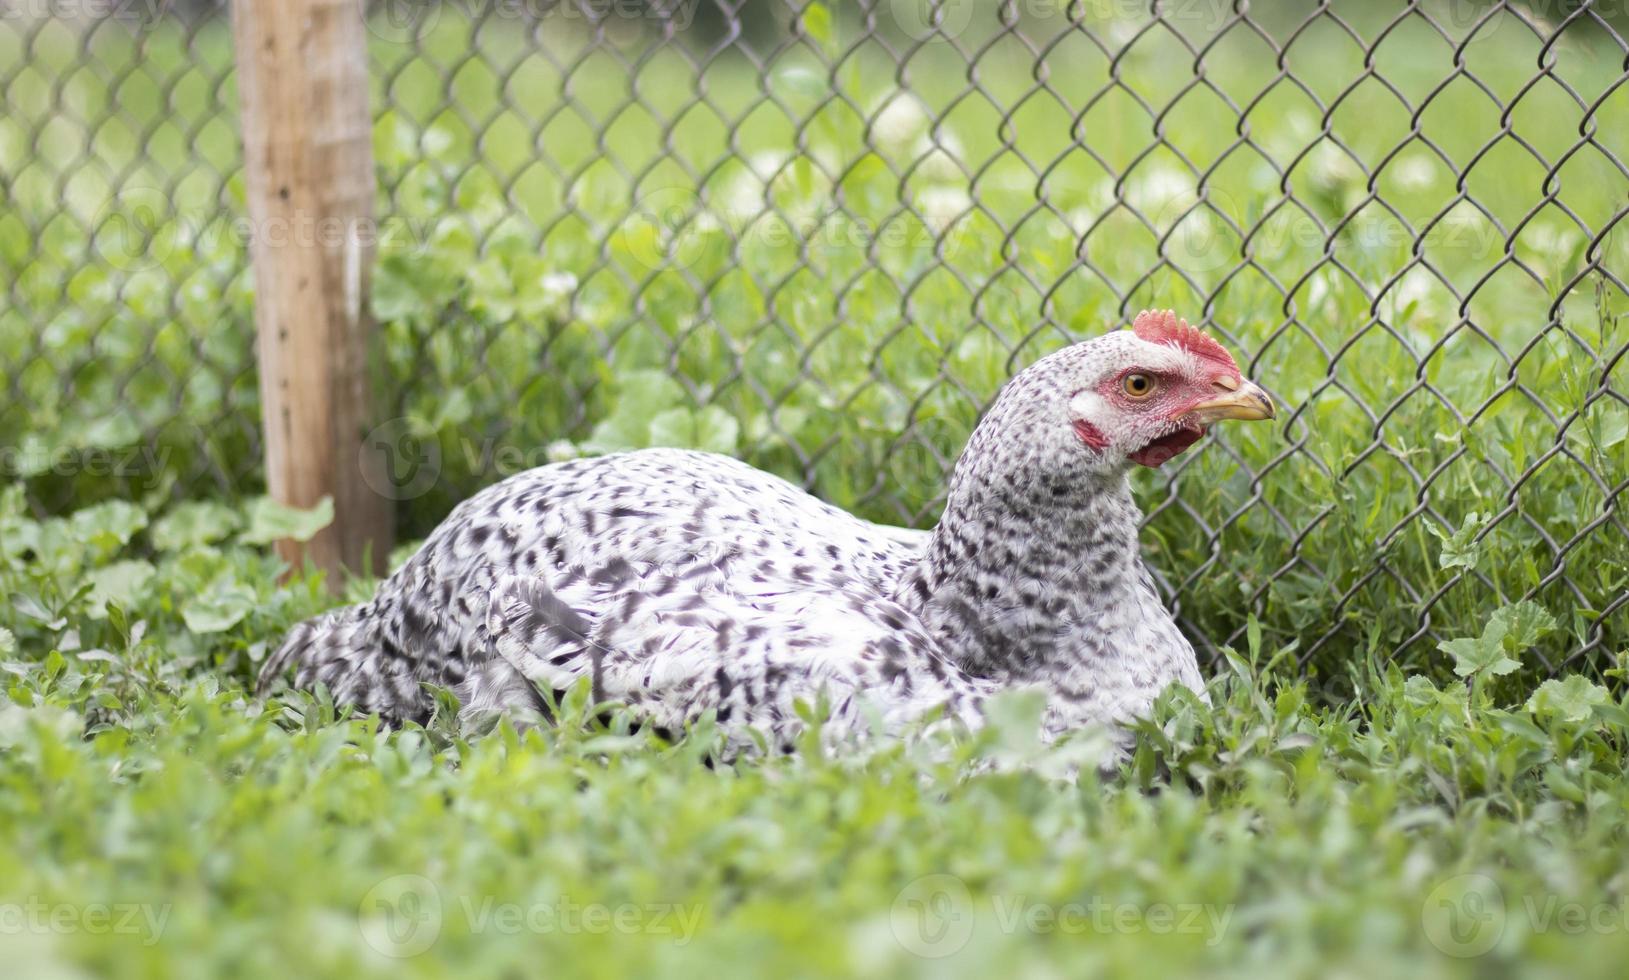 Chickens on the farm, poultry concept. White loose chicken outdoors. Funny bird on a bio farm. Domestic birds on a free range farm. Breeding chickens. Walk in the yard. Agricultural industry. photo